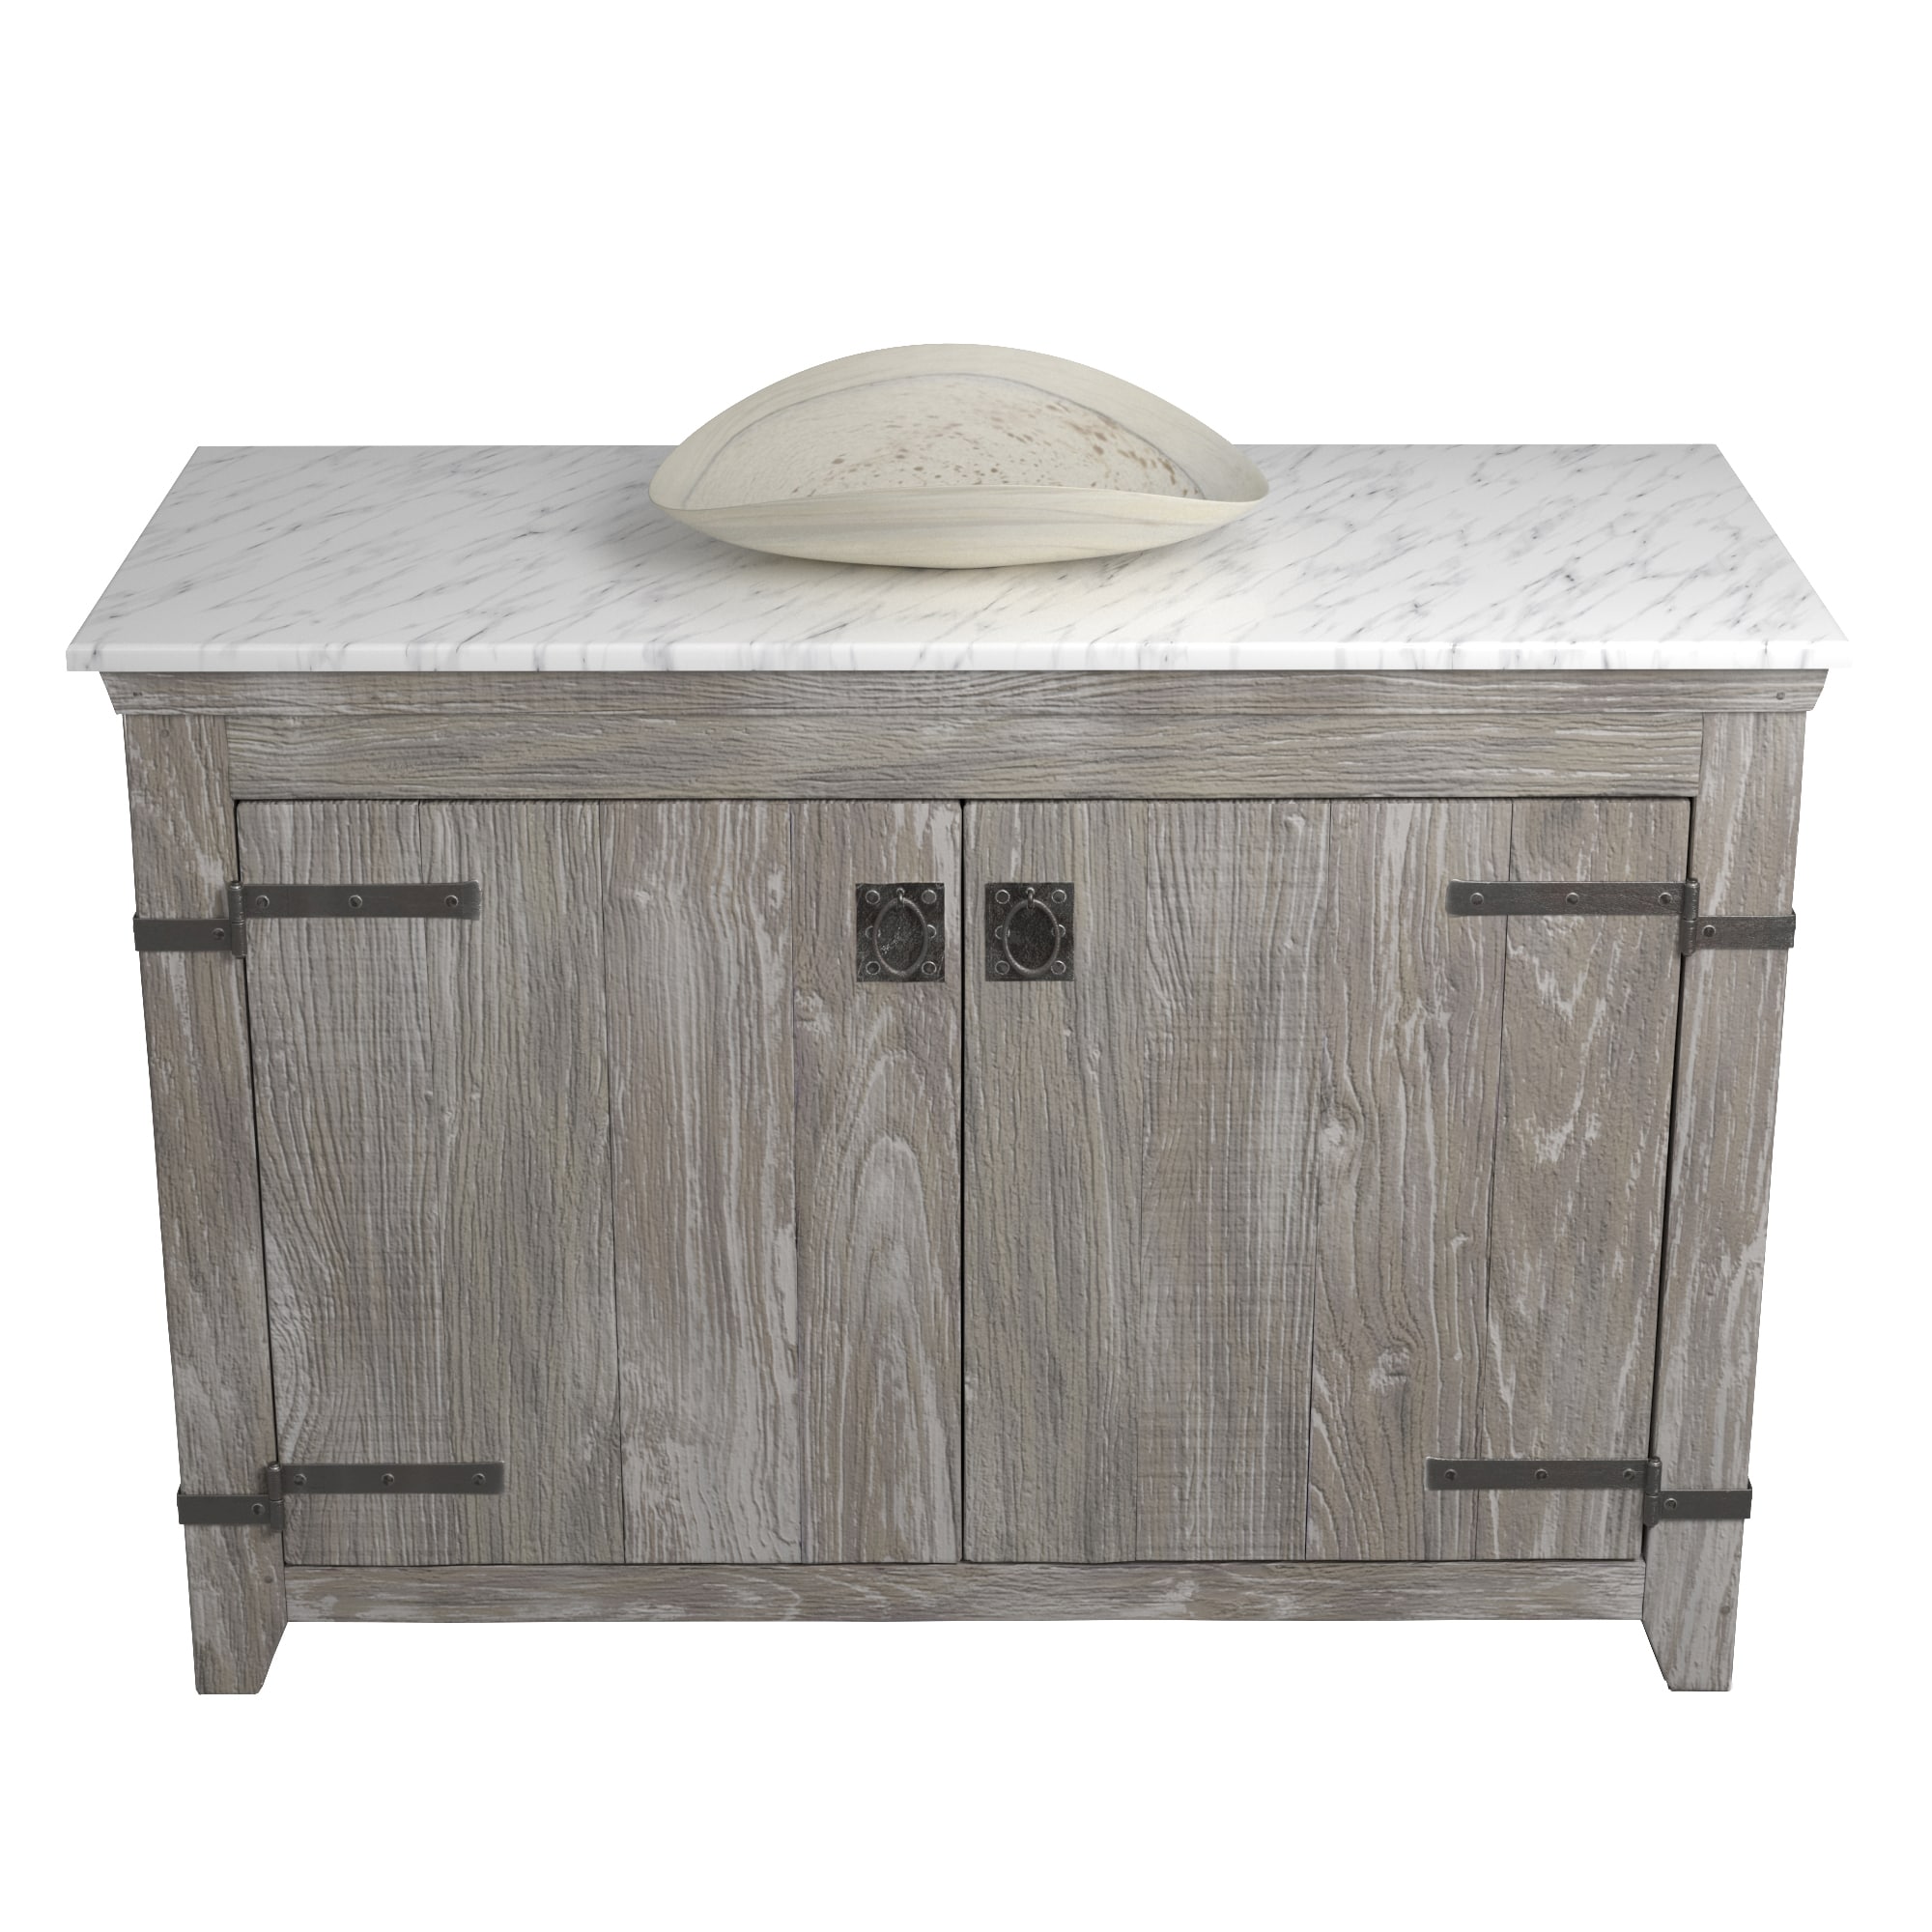 Native Trails 48" Americana Vanity in Driftwood with Carrara Marble Top and Sorrento in Beachcomber, No Faucet Hole, BND48-VB-CT-MG-112